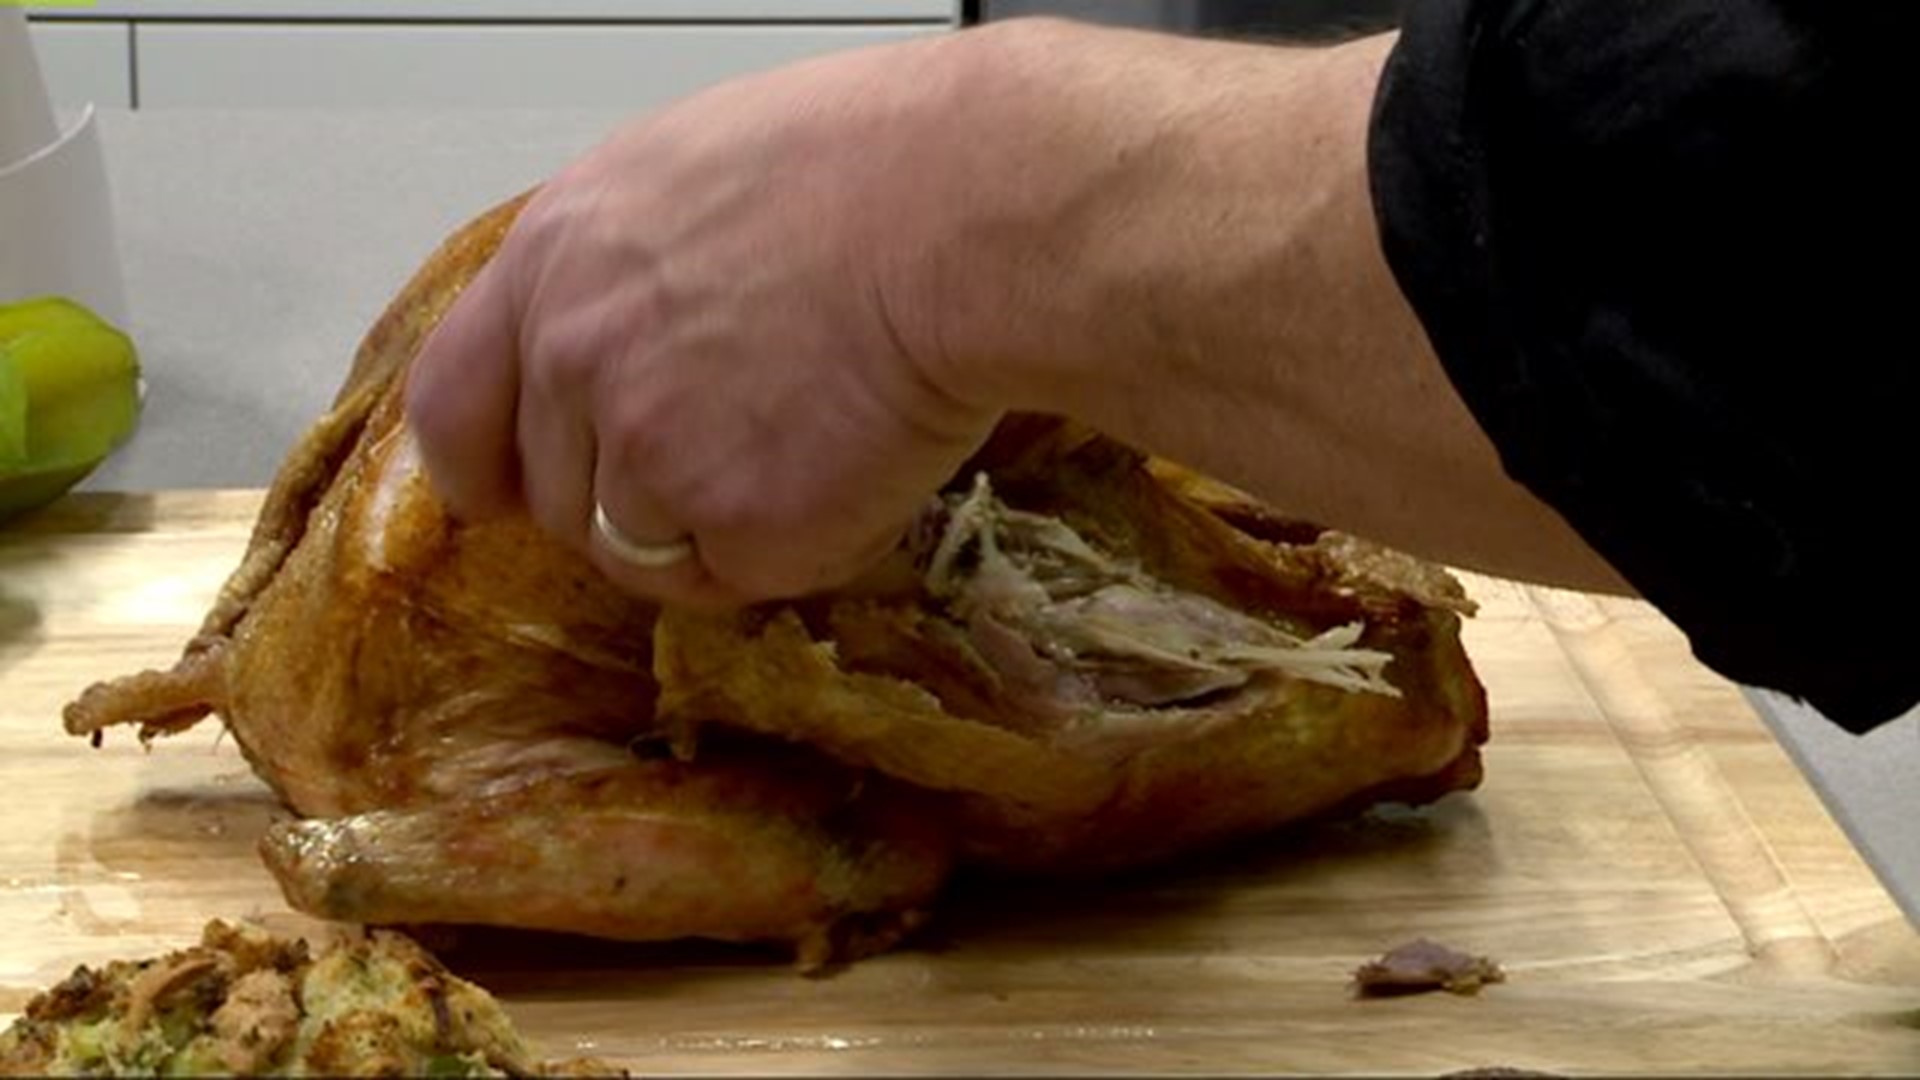 Tip for Holiday Dinners and Turkey Carving from Giant